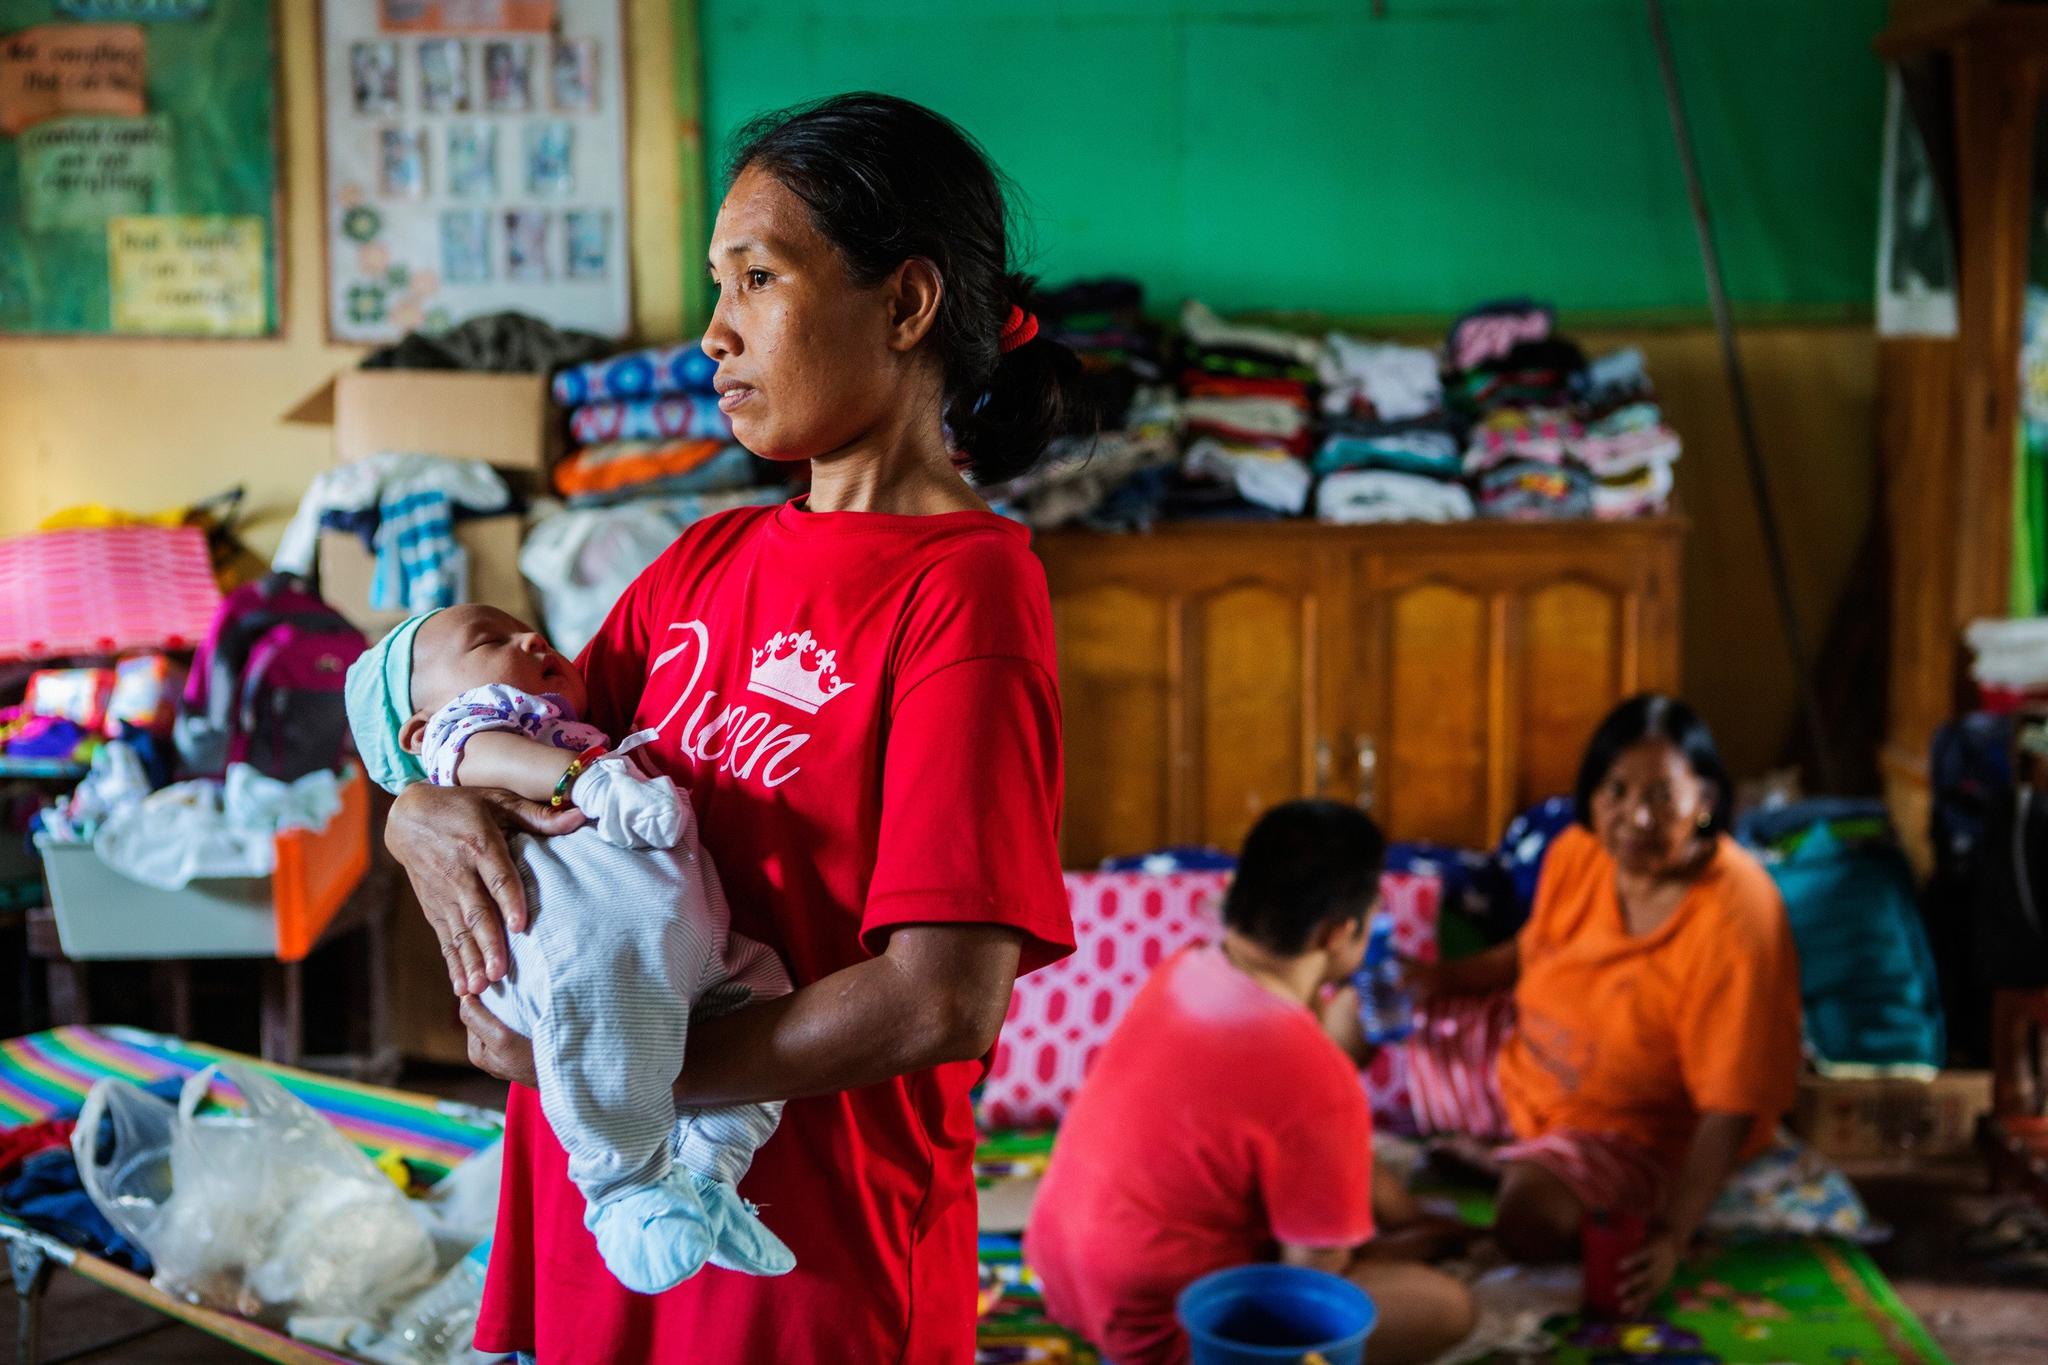 A woman in the Philippines holds her baby standing in a crowded room. Two other people sit behind her, surrounded by belongings.